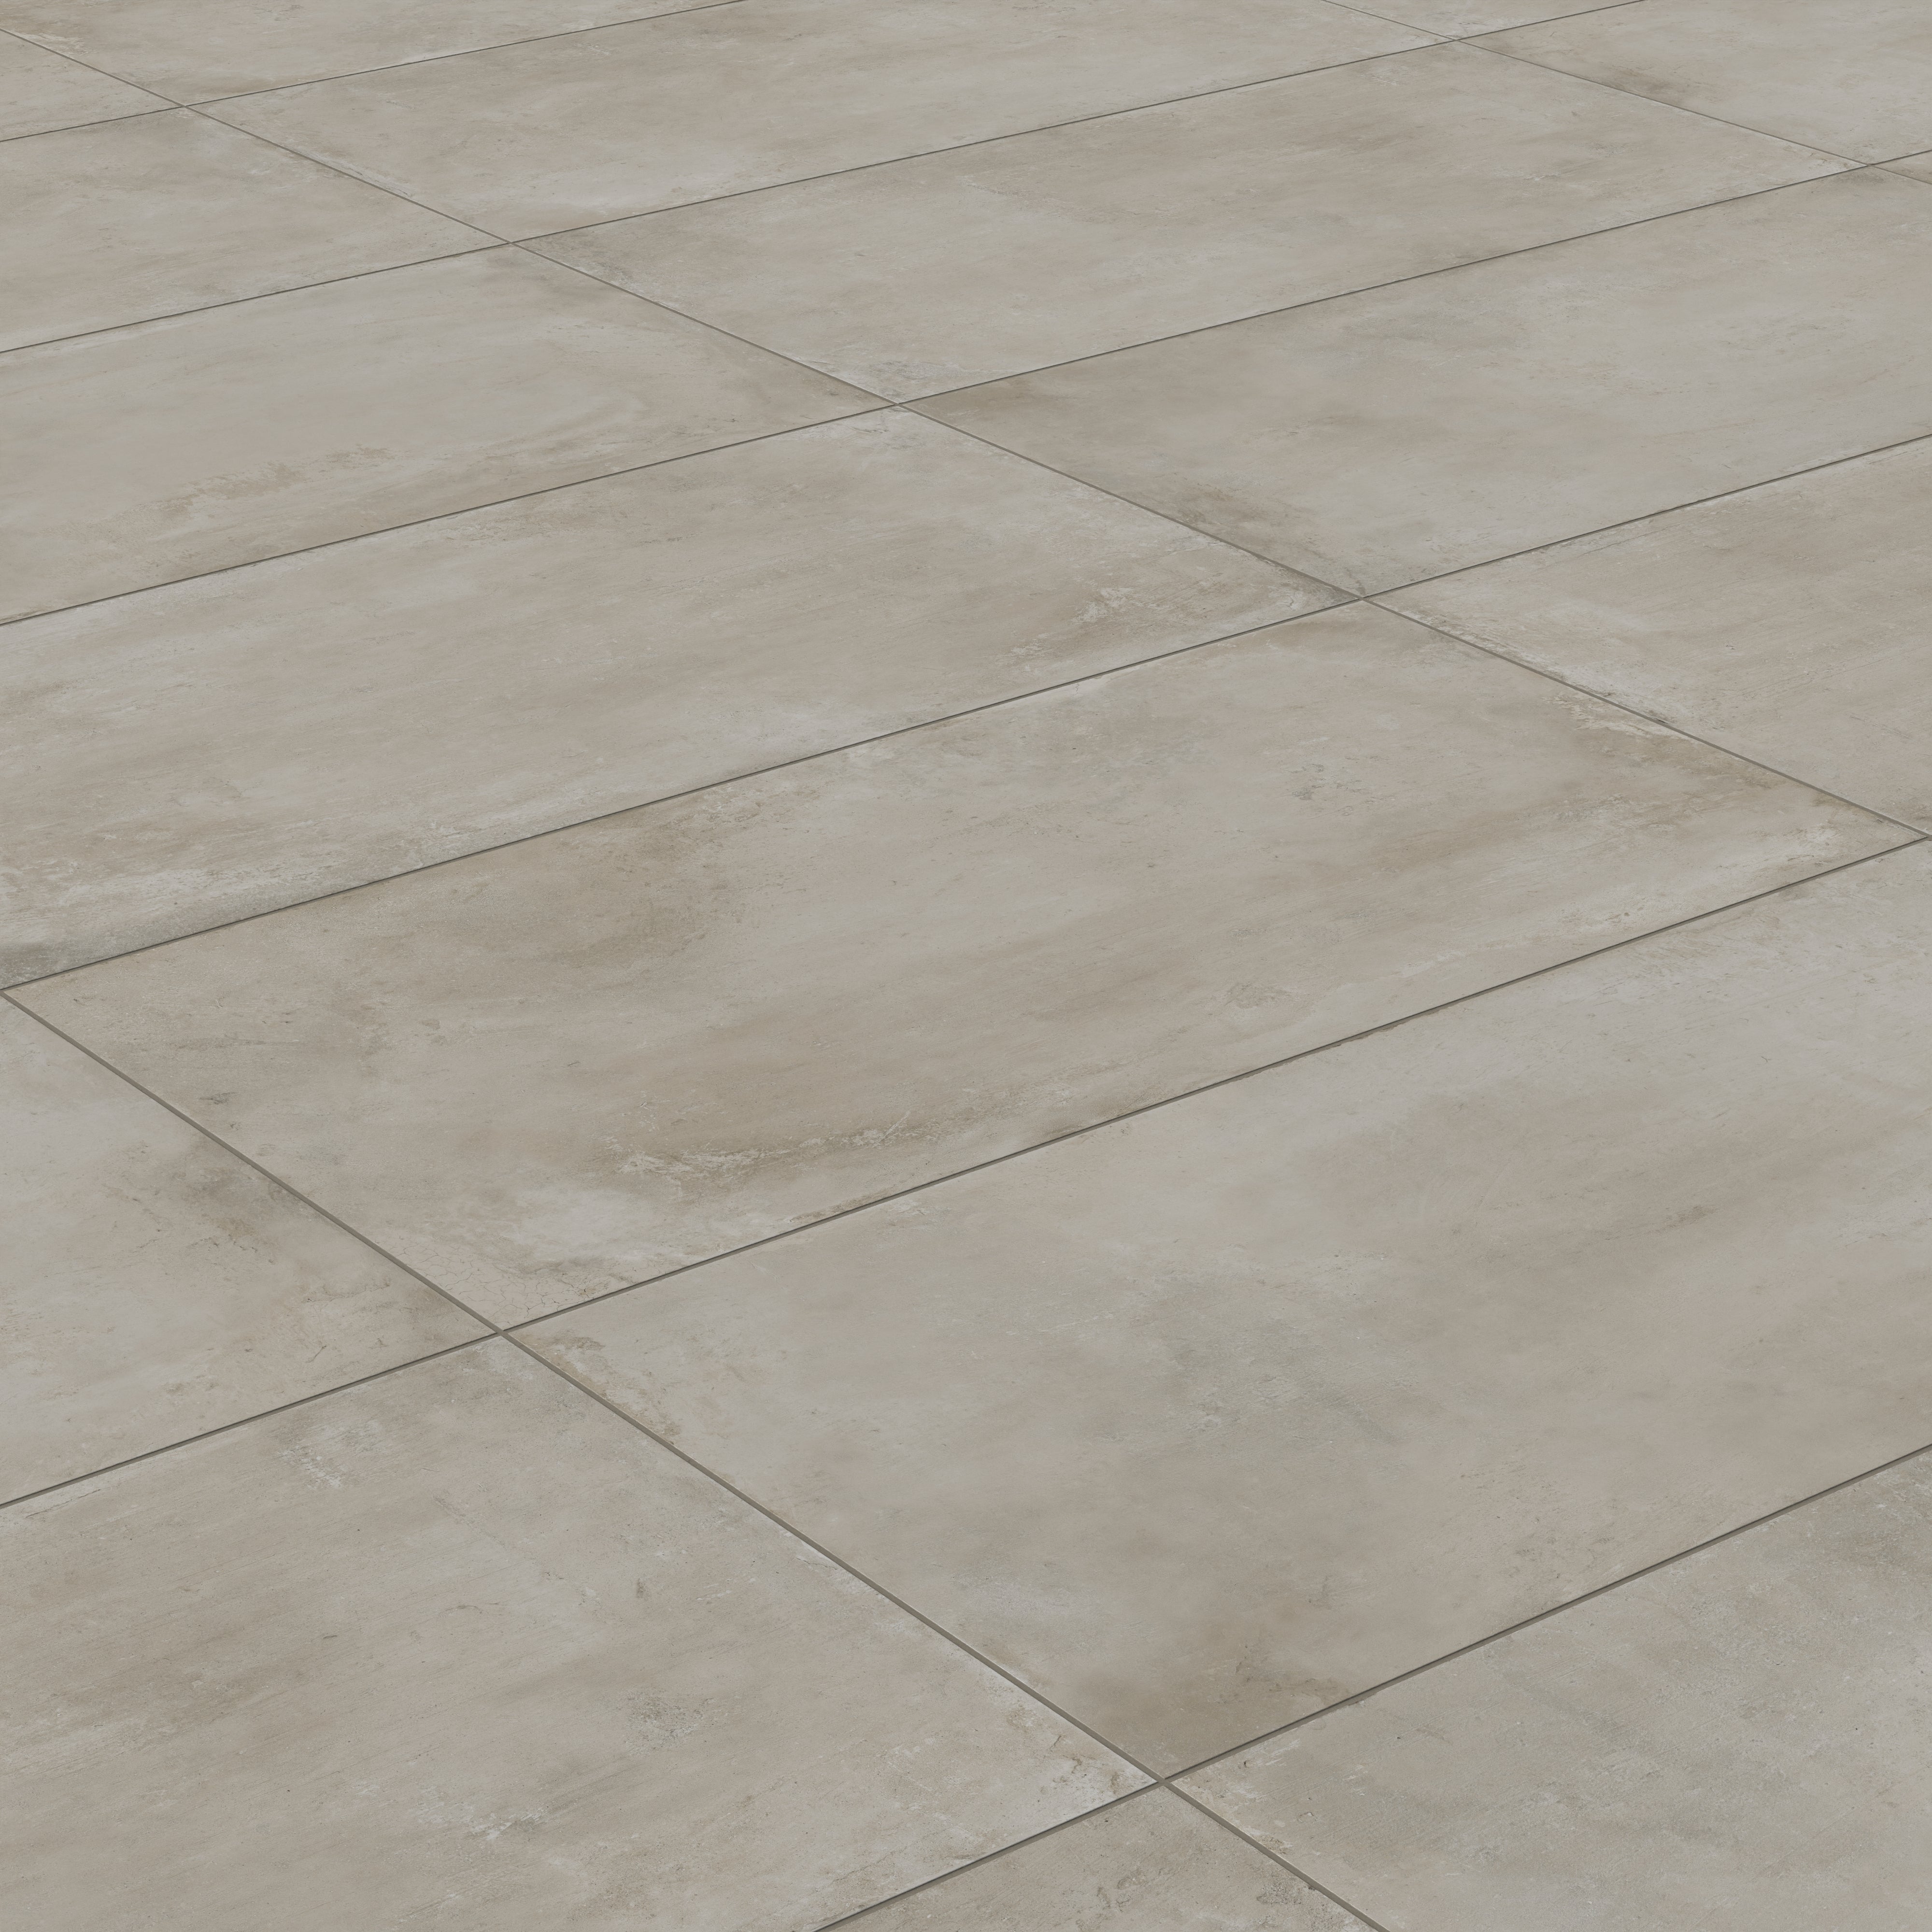 Ramsey 24x48 Grip Porcelain 2cm Paver Tile in Putty